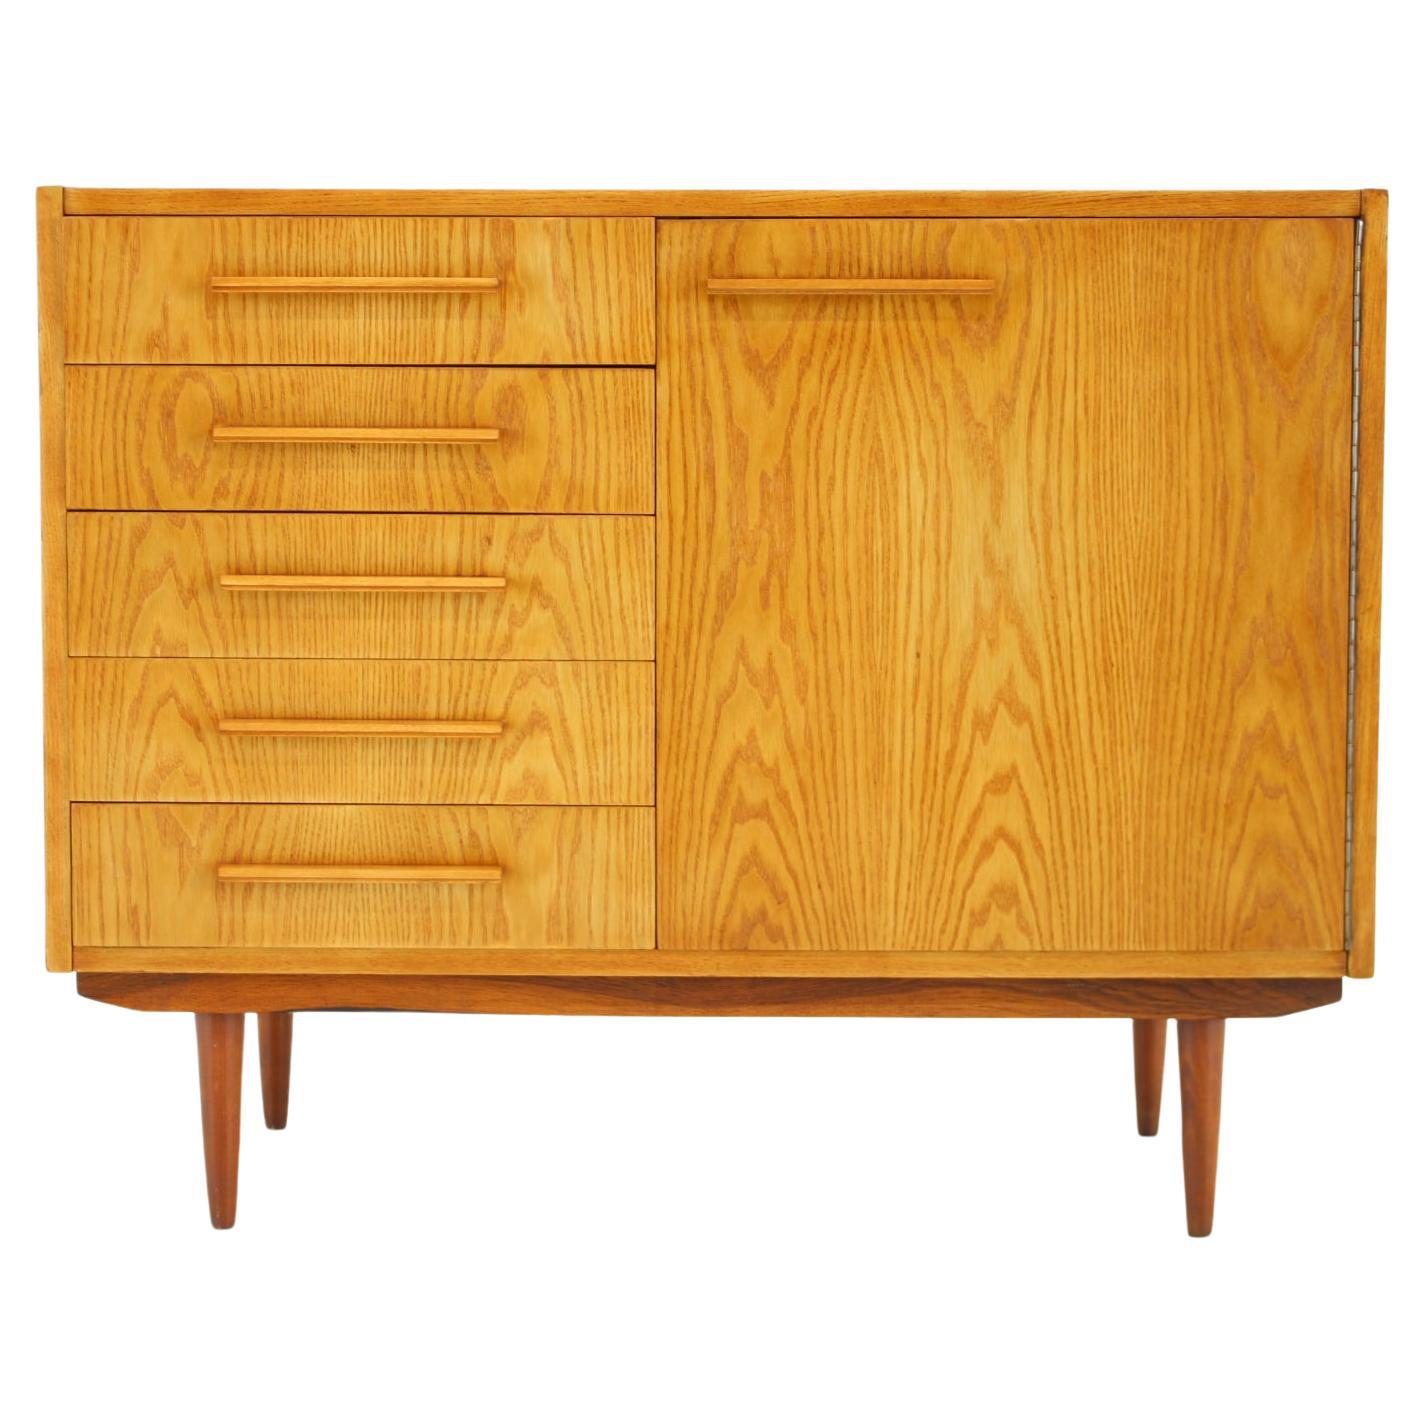 1970s Maple Cabinet or Chest Of Drawers, Czechoslovakia